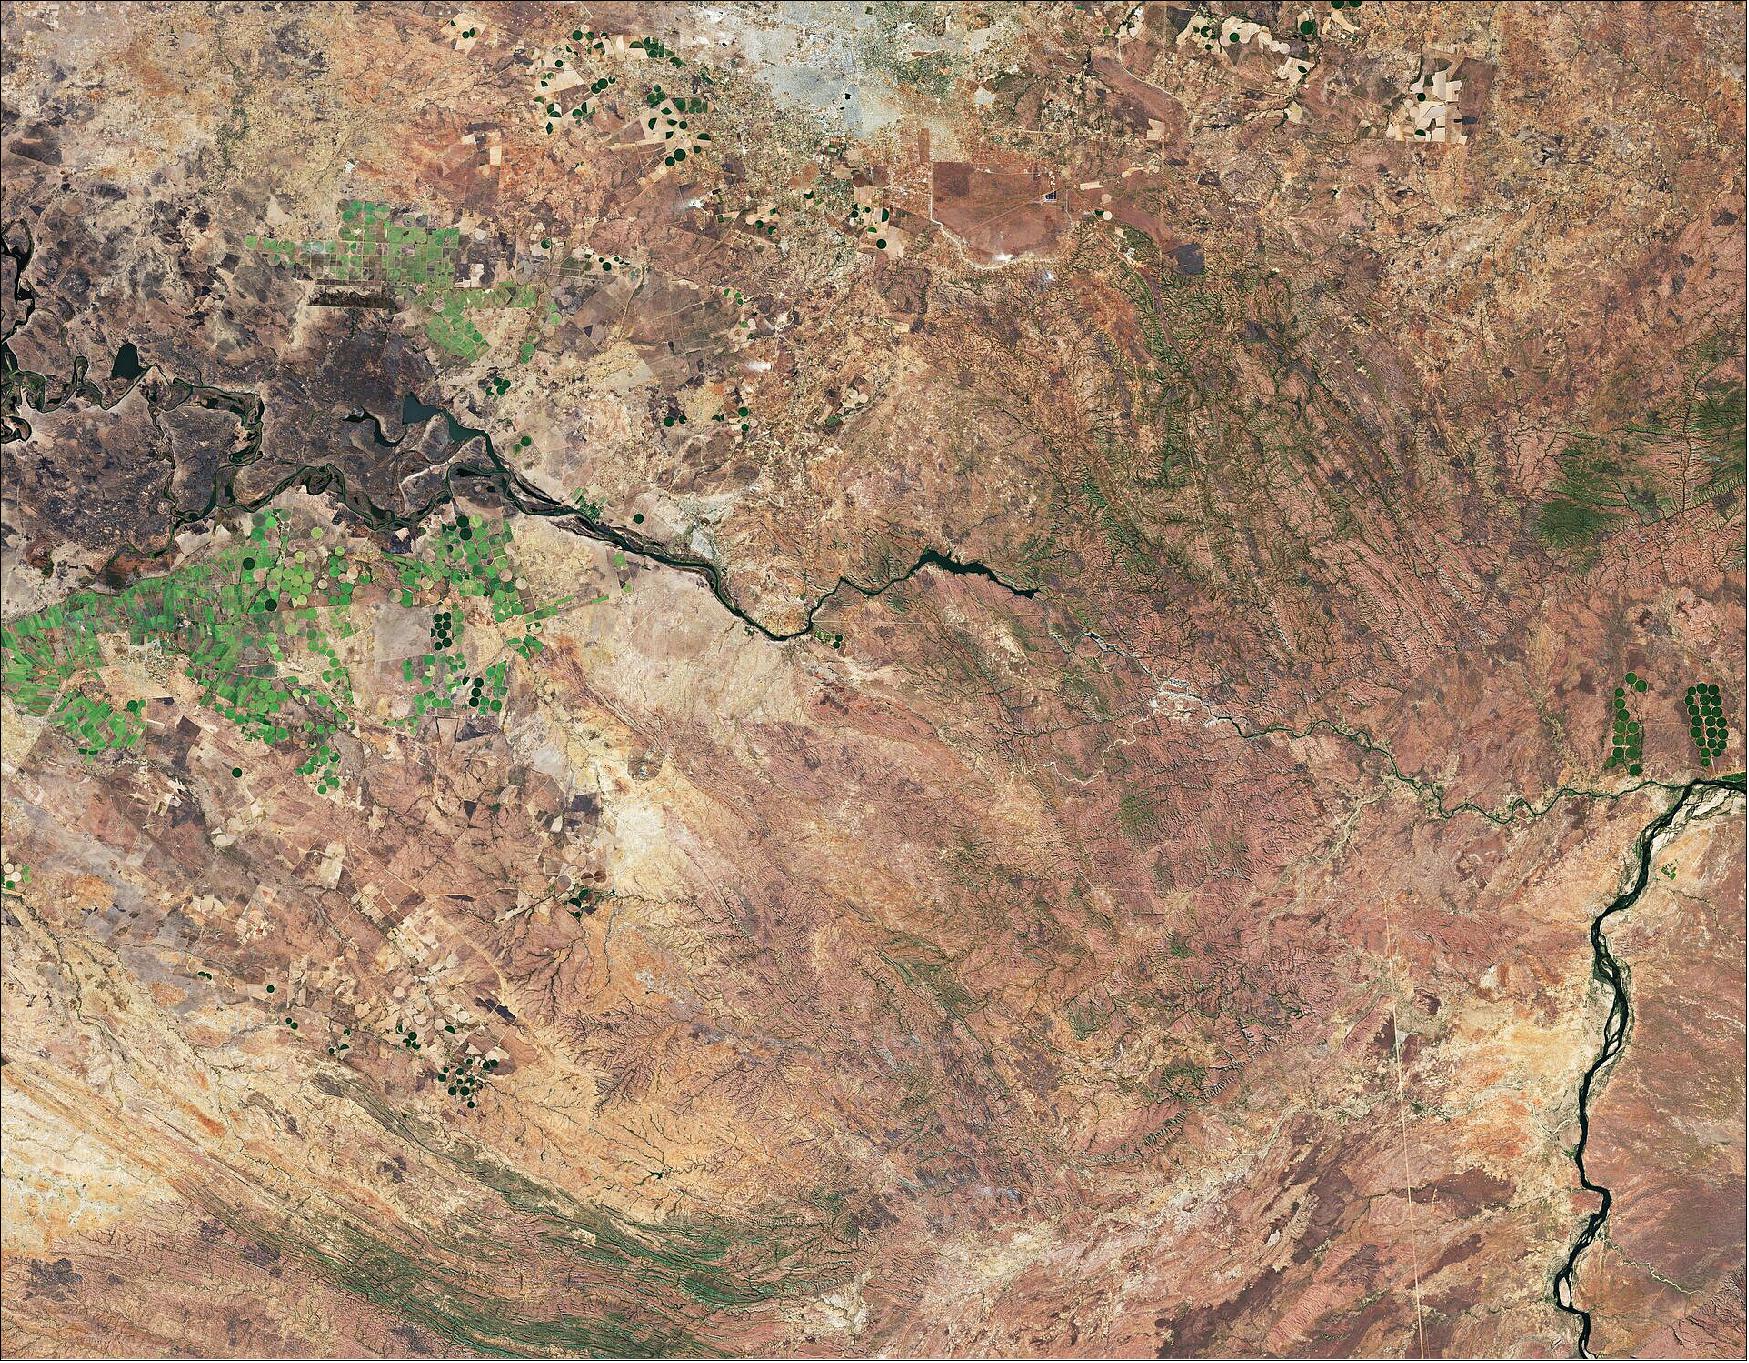 Figure 71: Data from the Copernicus Sentinel-2 mission can help monitor changes in urban expansion, land-cover change and agriculture monitoring. The mission’s frequent revisits over the same area and high spatial resolution also allow changes in inland water bodies to be closely monitored. This image, which was captured on 29 July 2019, is also featured on the Earth from Space program (image credit: ESA, the image contains modified Copernicus Sentinel data (2019), processed by ESA, CC BY-SA 3.0 IGO)